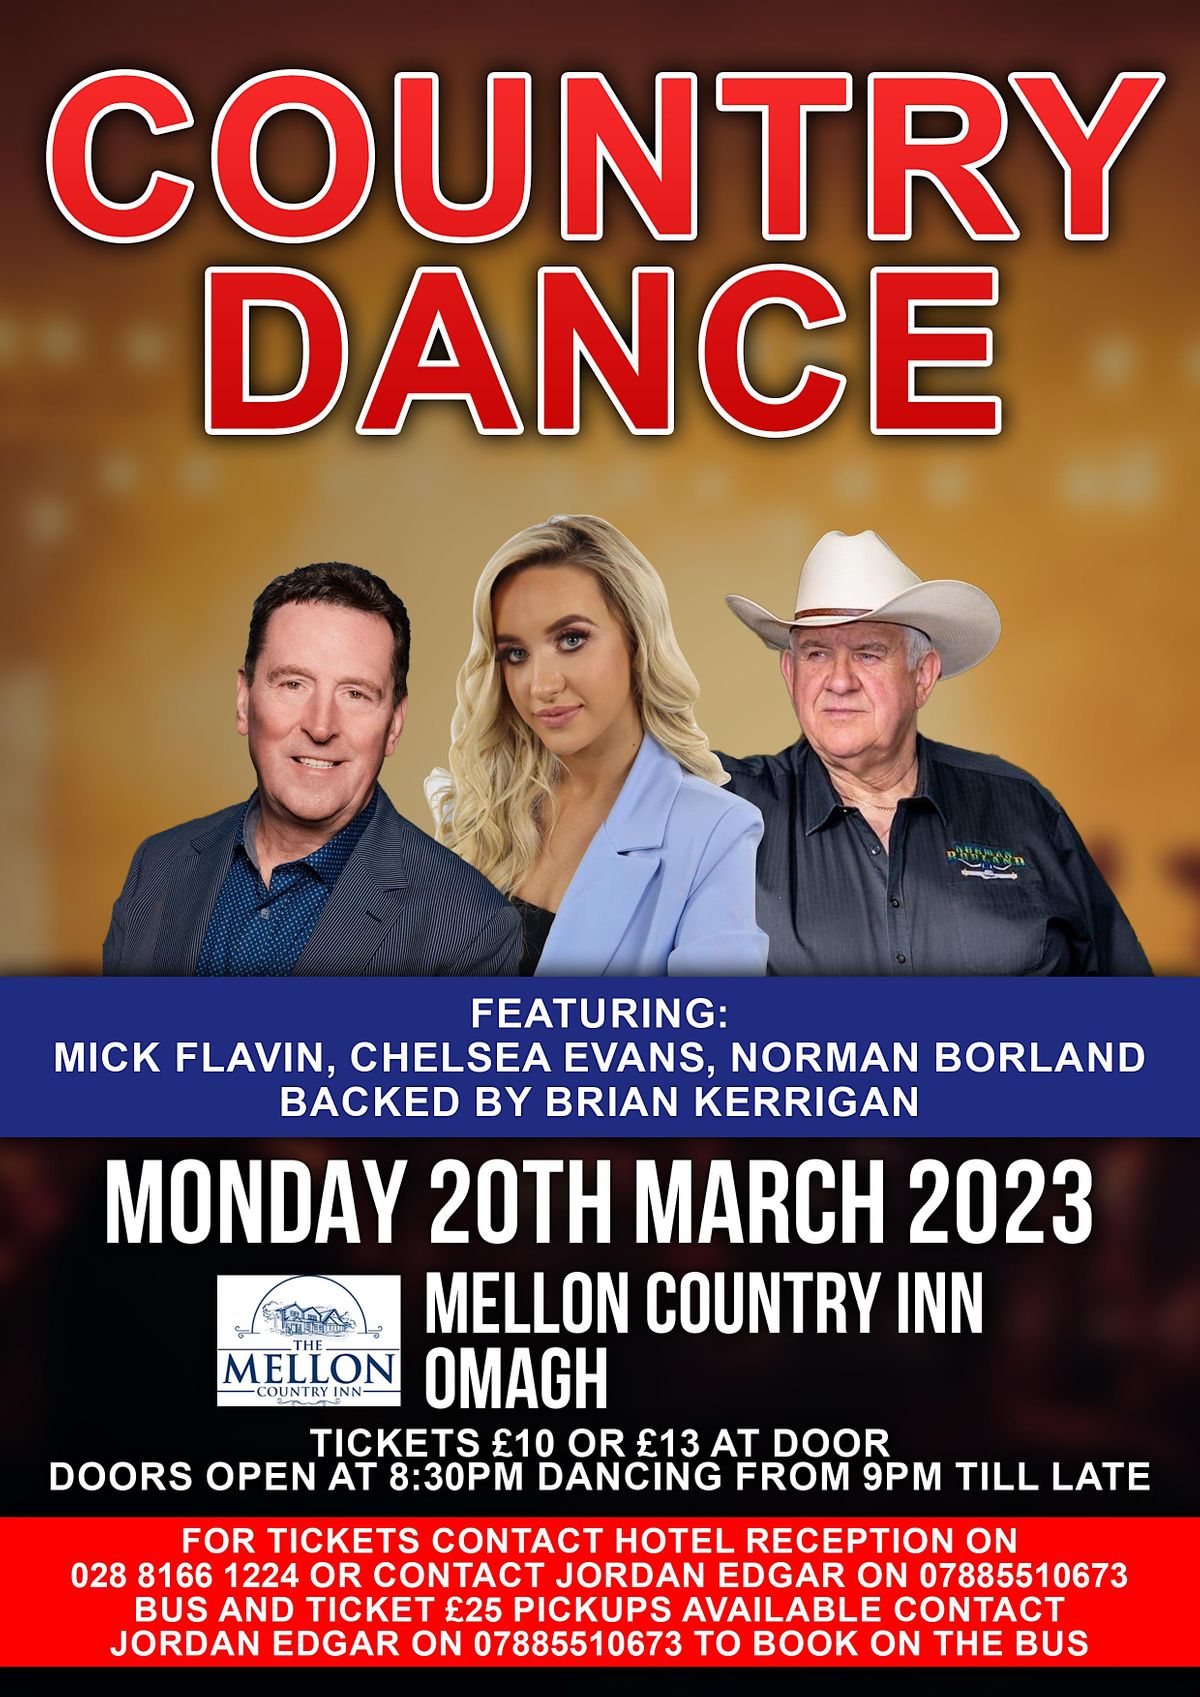 County dance | Mellon Country Hotel, Omagh, NI | March 20 to March 21